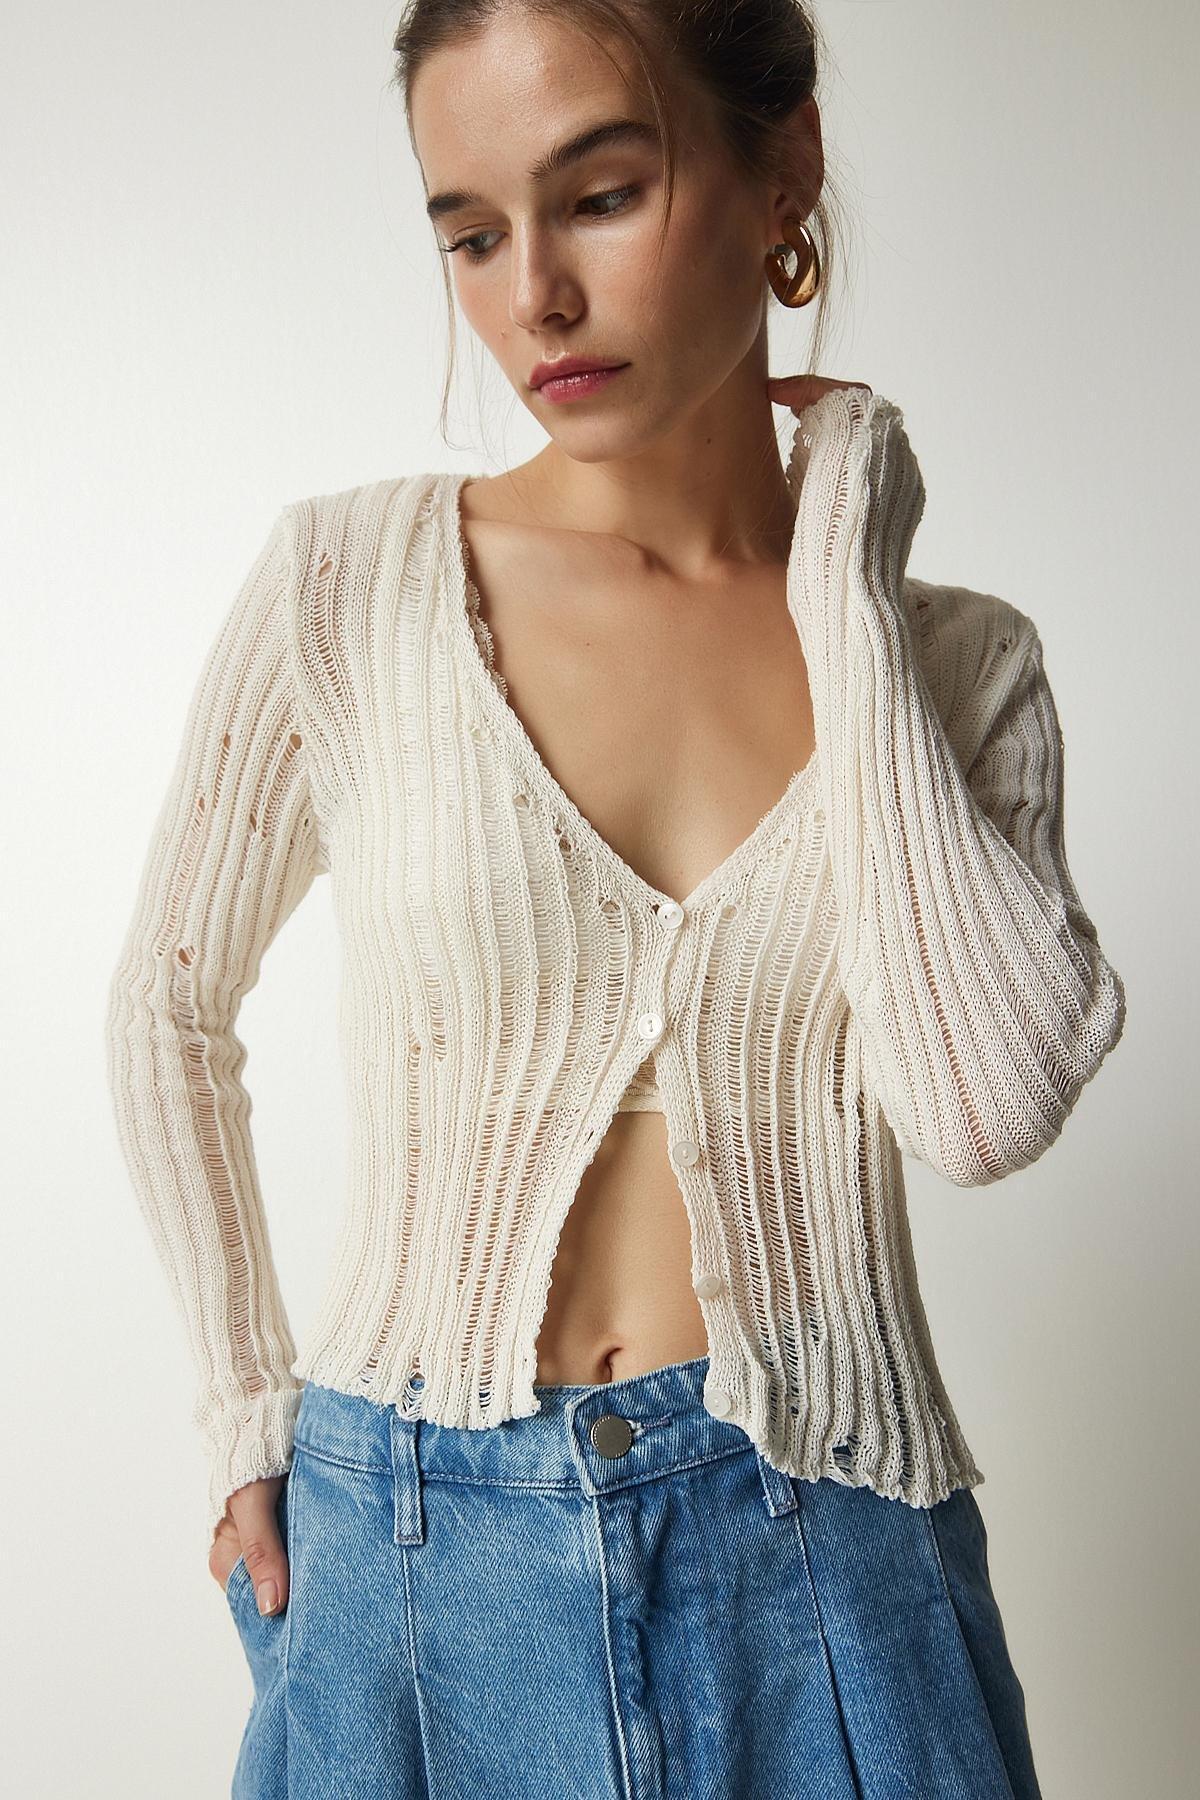 Happiness Istanbul - White Ripped Detailed Buttoned Knitwear Cardigan